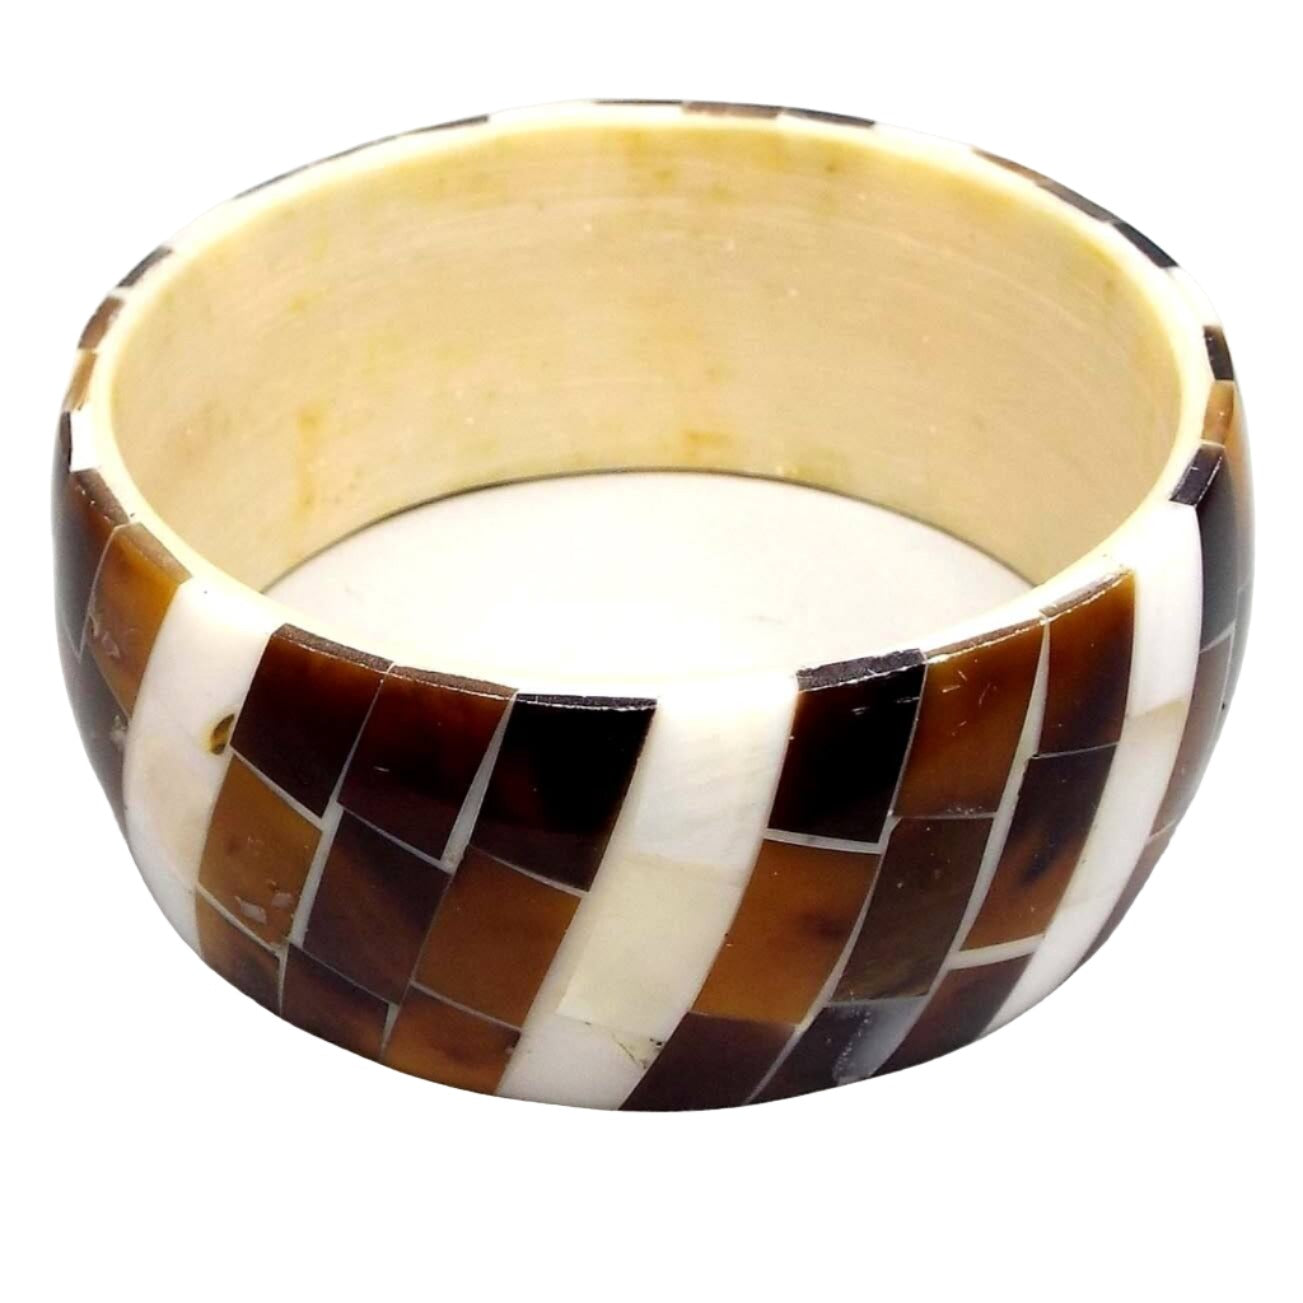 Angled view of the retro vintage wide bone bangle bracelet. The inside layer is bone in an off white yellow color. the outside has inlaid pieces of dyed horn and natural mother of pearl shell.